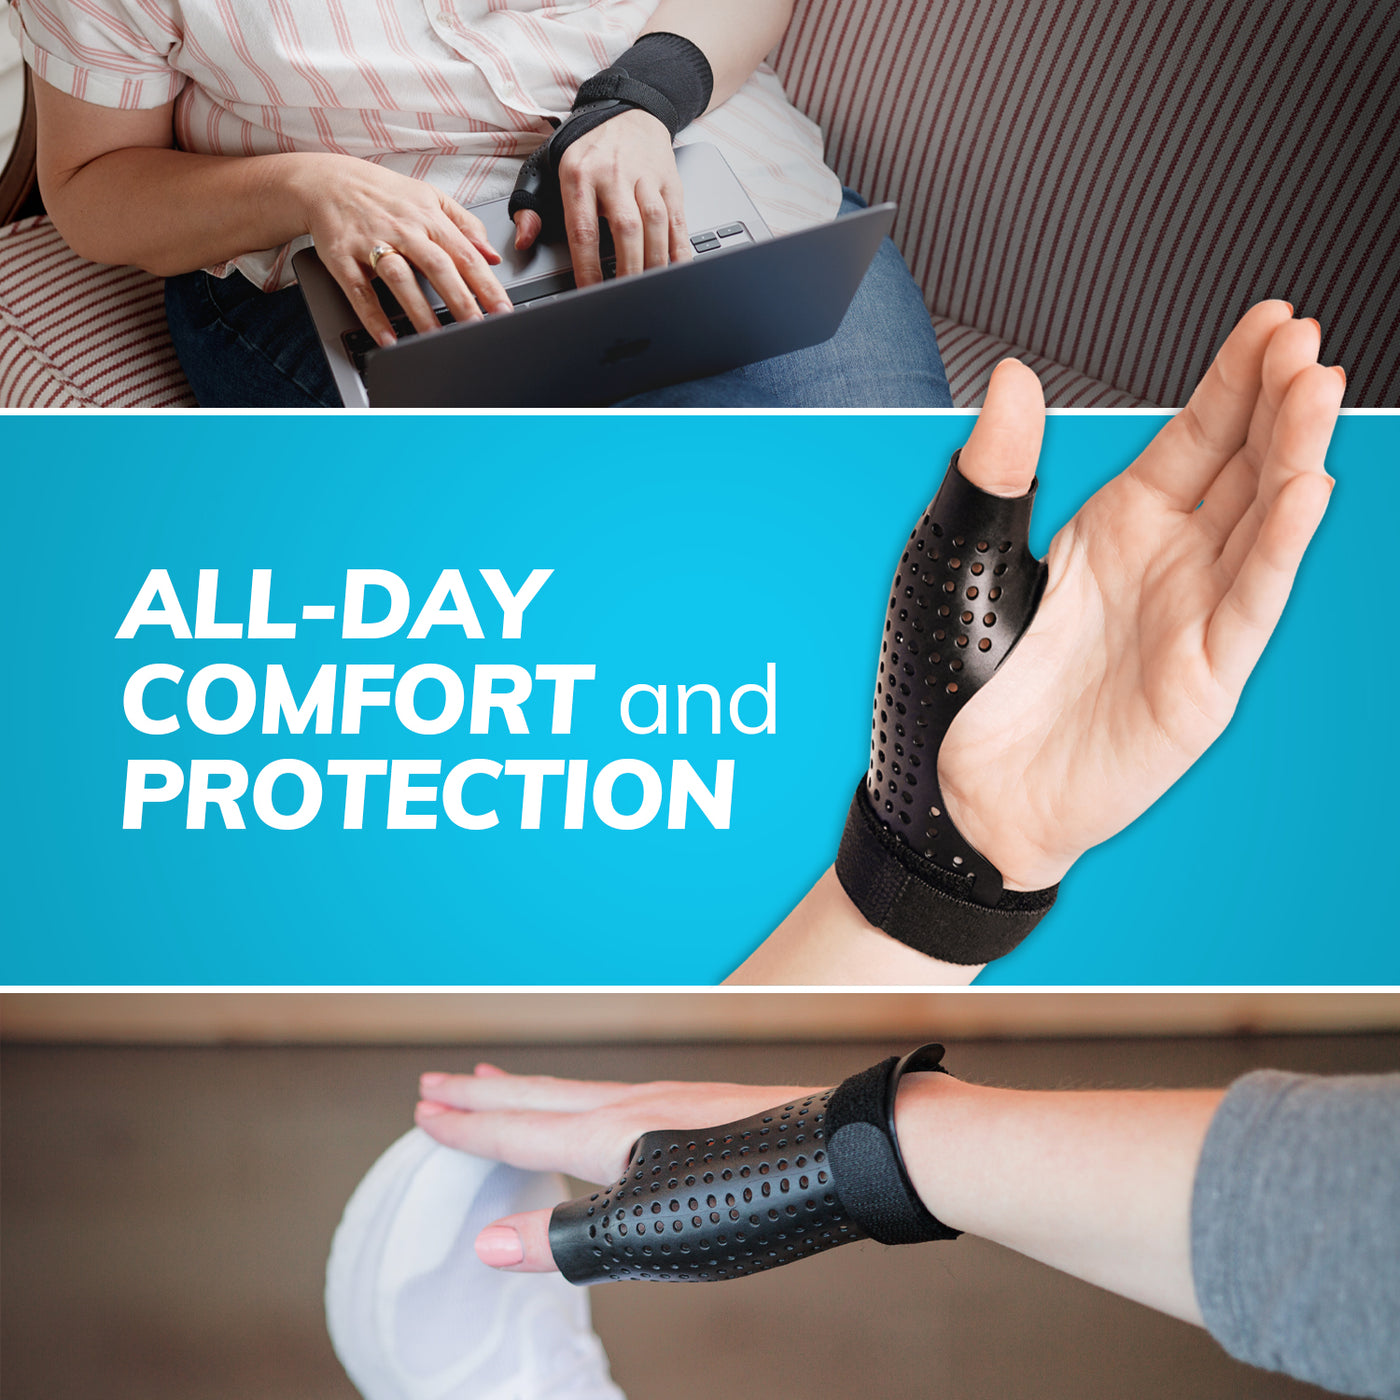 Use the trigger thumb brace for all day comfort and protection